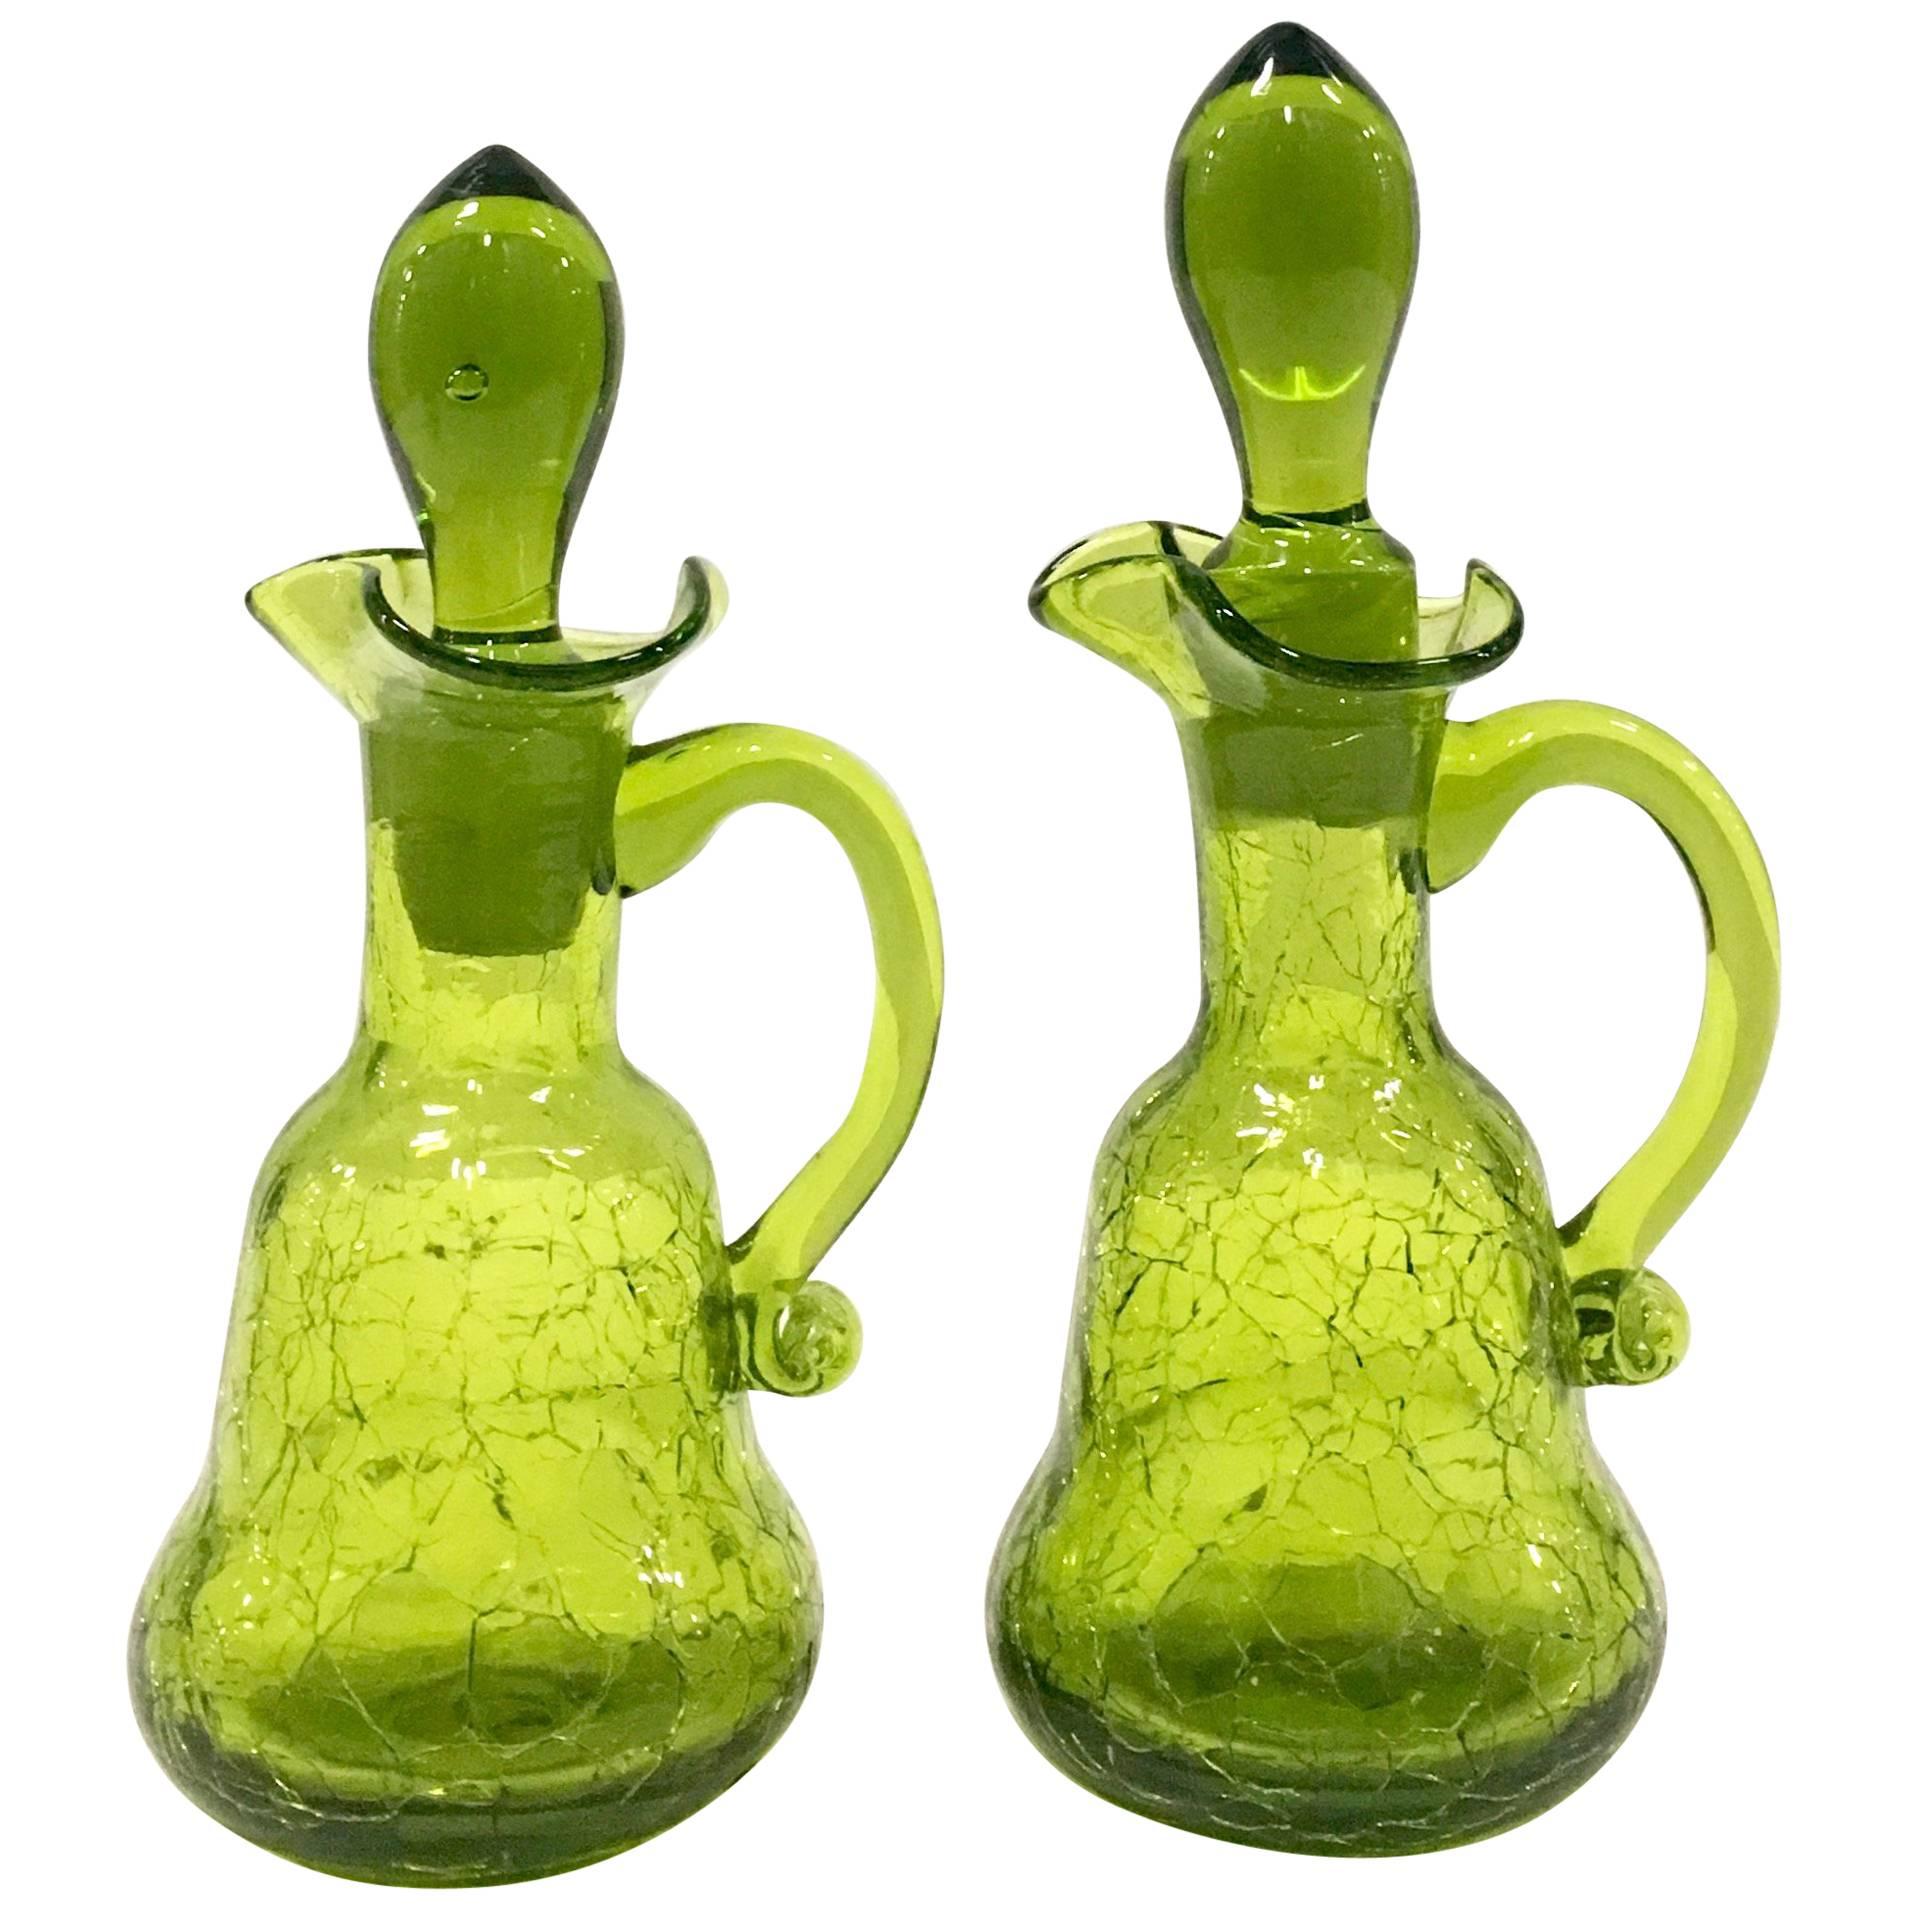 Mid-20th century pair of Blenko style blown crackle glass, olive green cruet decanters. Features applied curved handles, ruffle neck detail and 